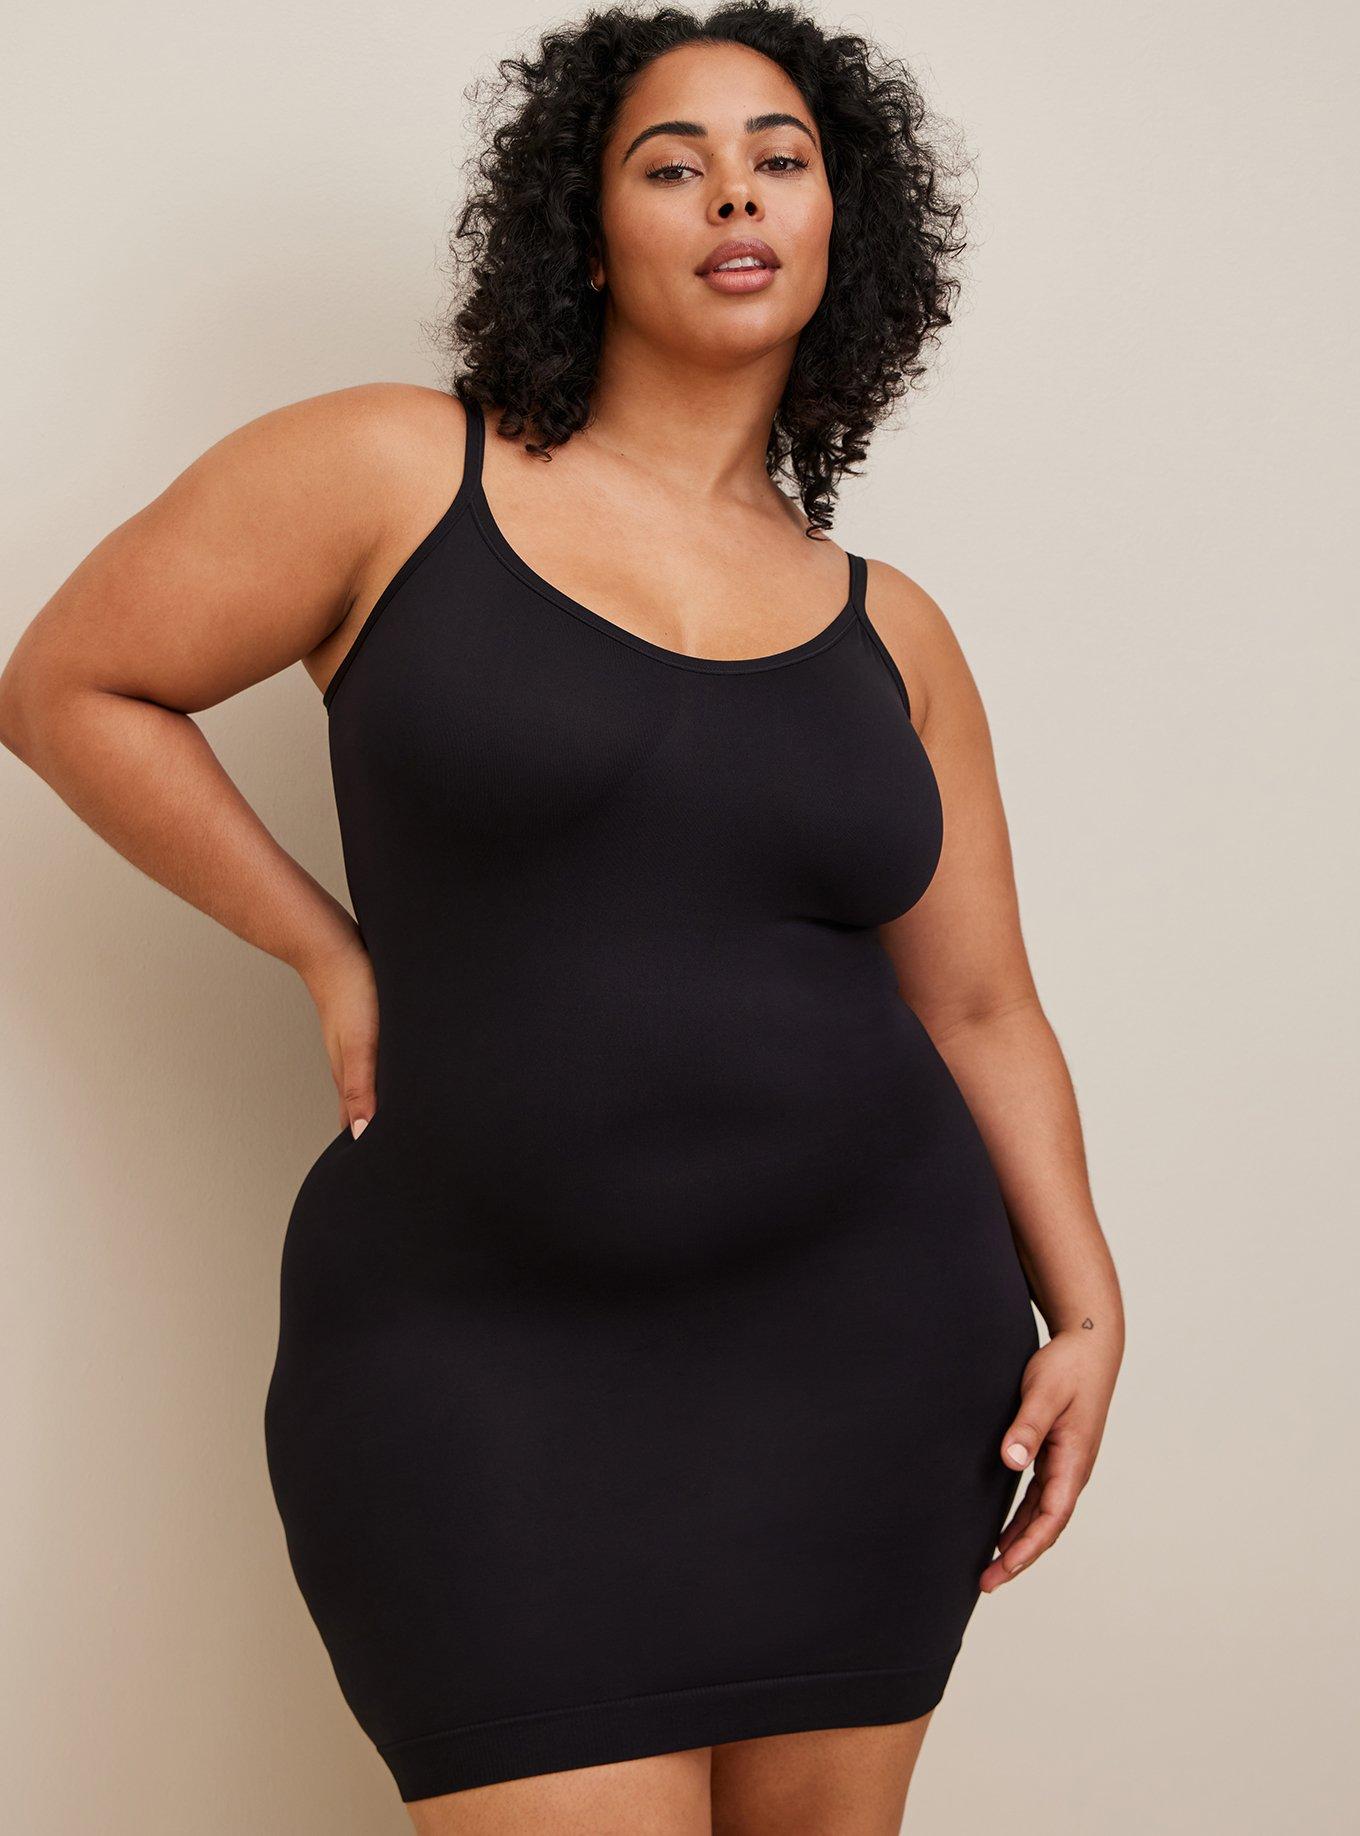 Women's Plus Size Seamless Tank Slip Dress. • Sleeveless • Scoop neckline •  Curve-Hugging • Body Contouring • Soft and stretchy • Seamless design for  comfort • Short length hem • Imported 